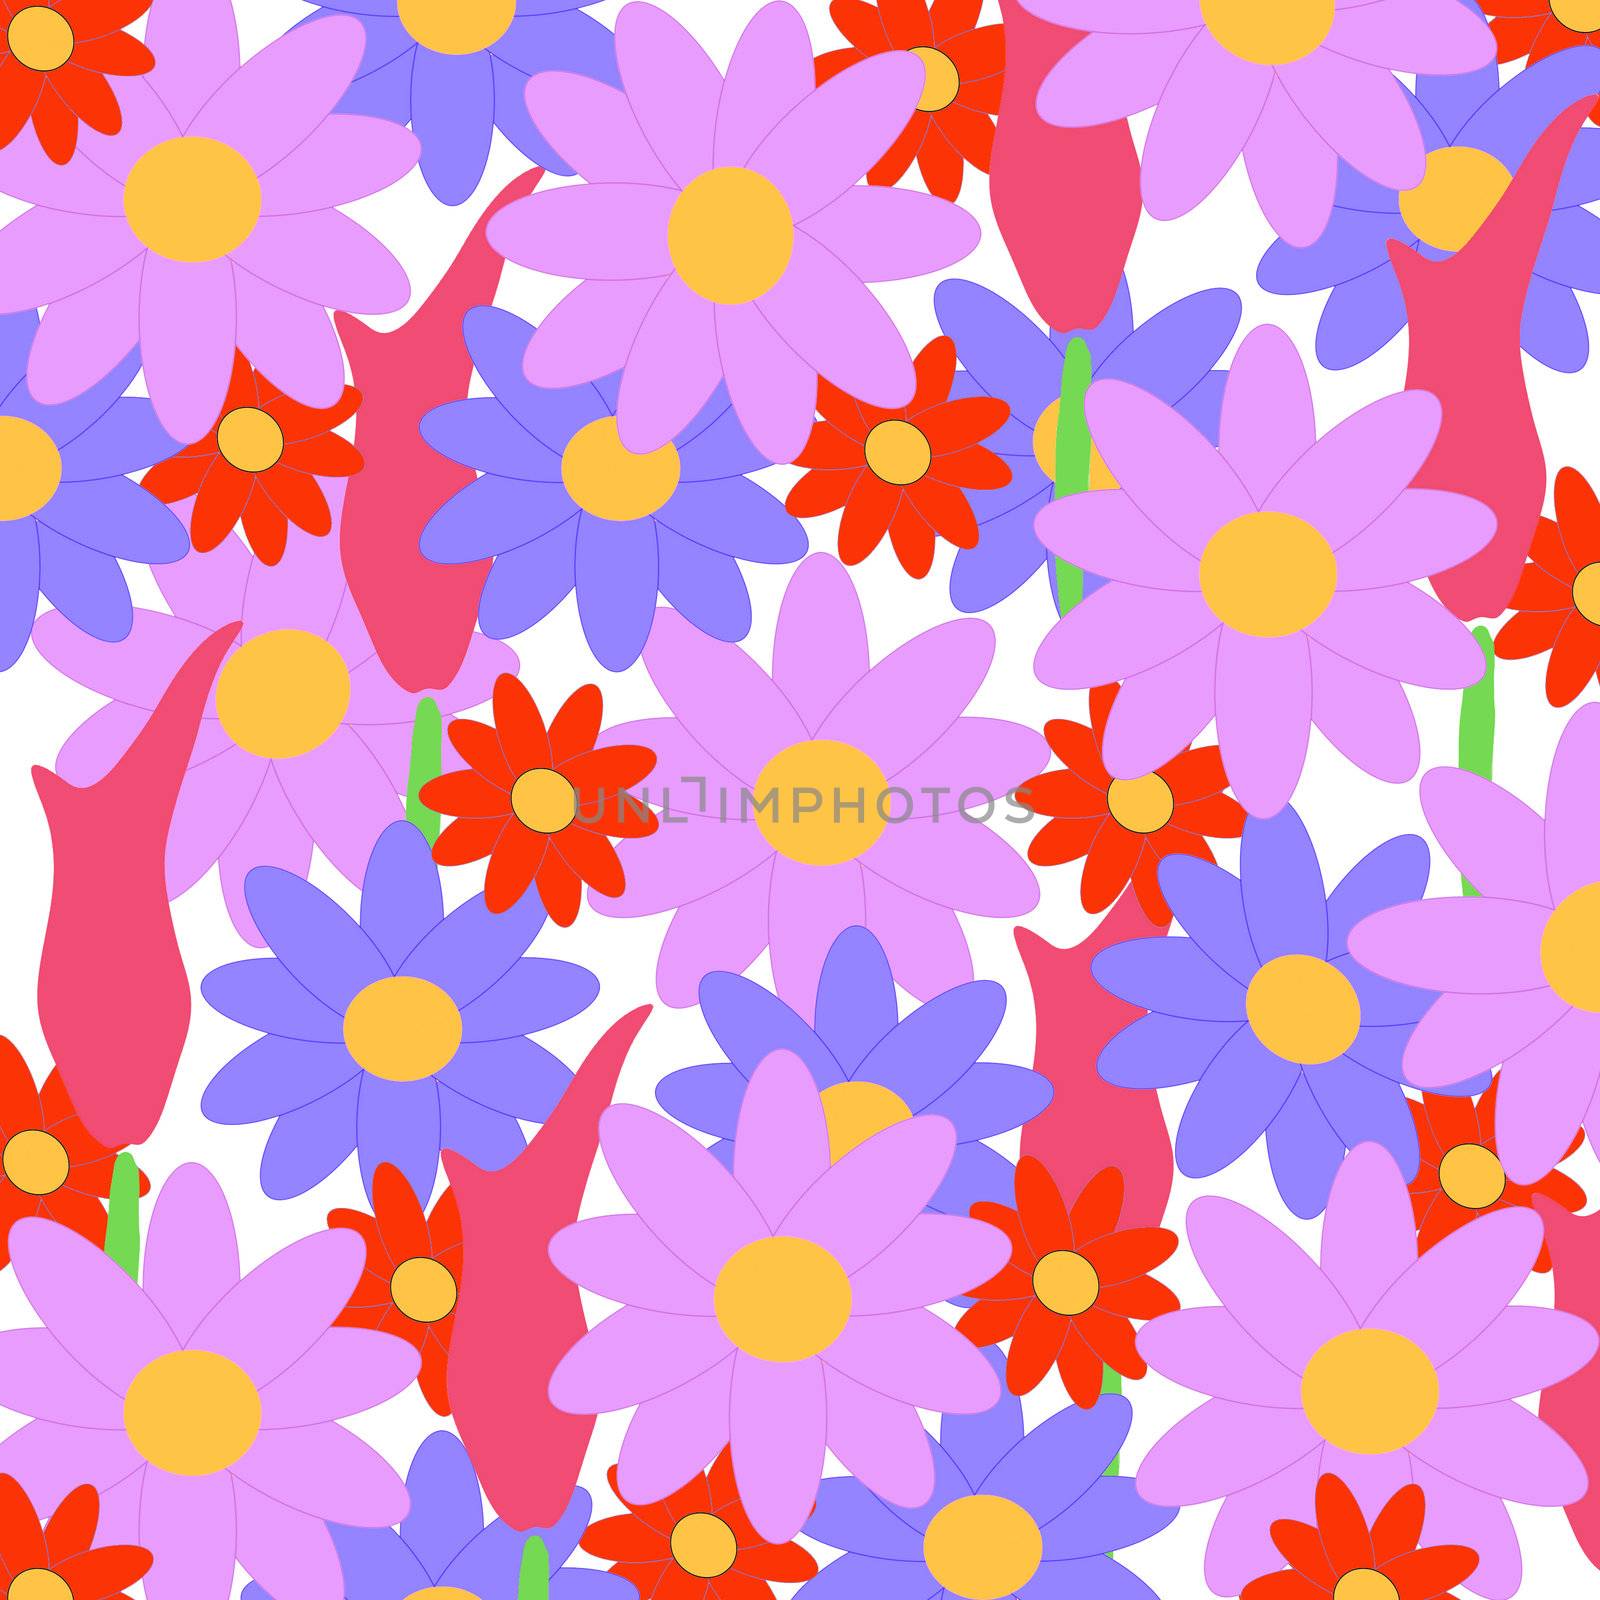 Background made of different kinds of colorful flowers. 